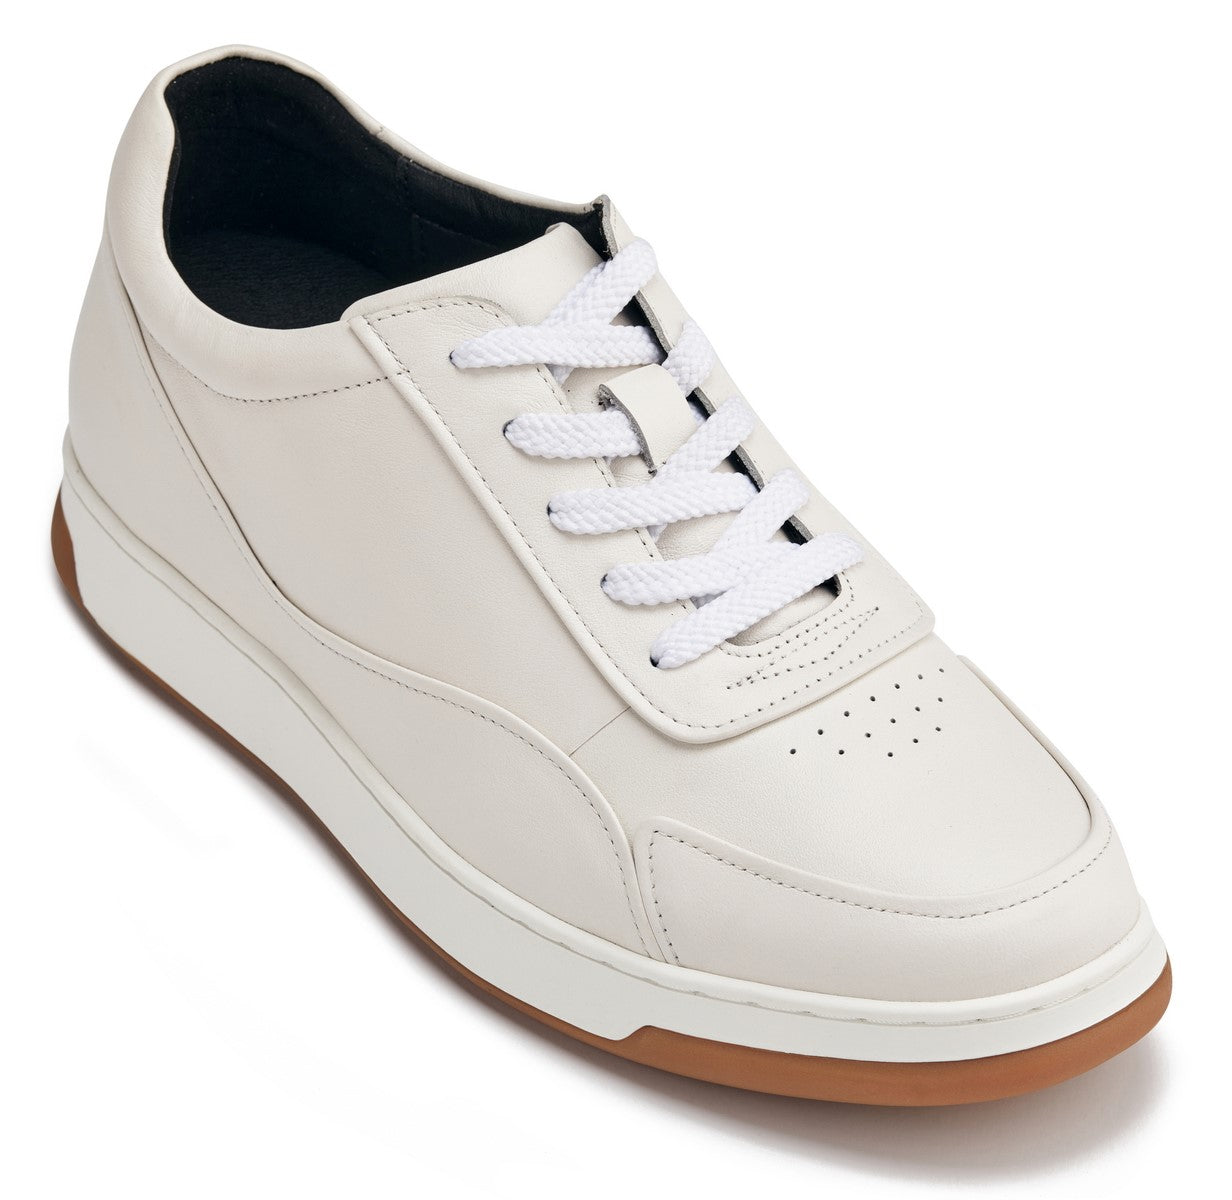 CALTO - Y7886 - 2.6 Inches Taller (White) - Leather Elevator Sneakers ...